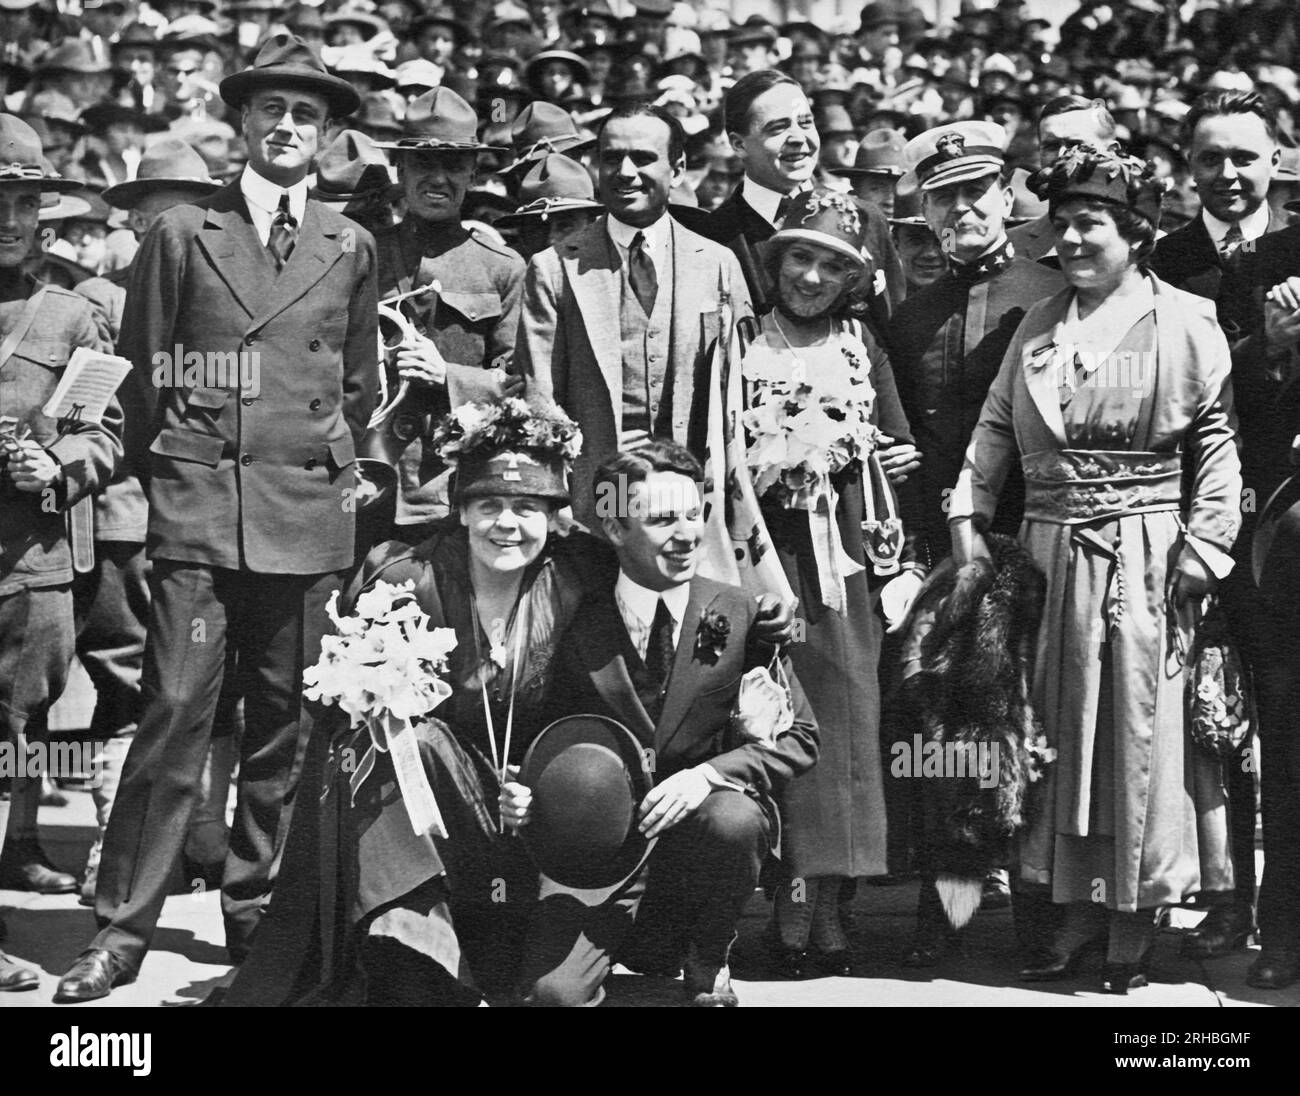 Washington, D.C.:  1918 Celebrities at the Liberty Loan drive in Washington.  Included are: Assistant Secretary of the Navy Franklin Roosevelt, Douglas Fairbanks, Mary Pickford, John Phillips Sousa, Marie Dressler and Charlie Chaplin. Stock Photo